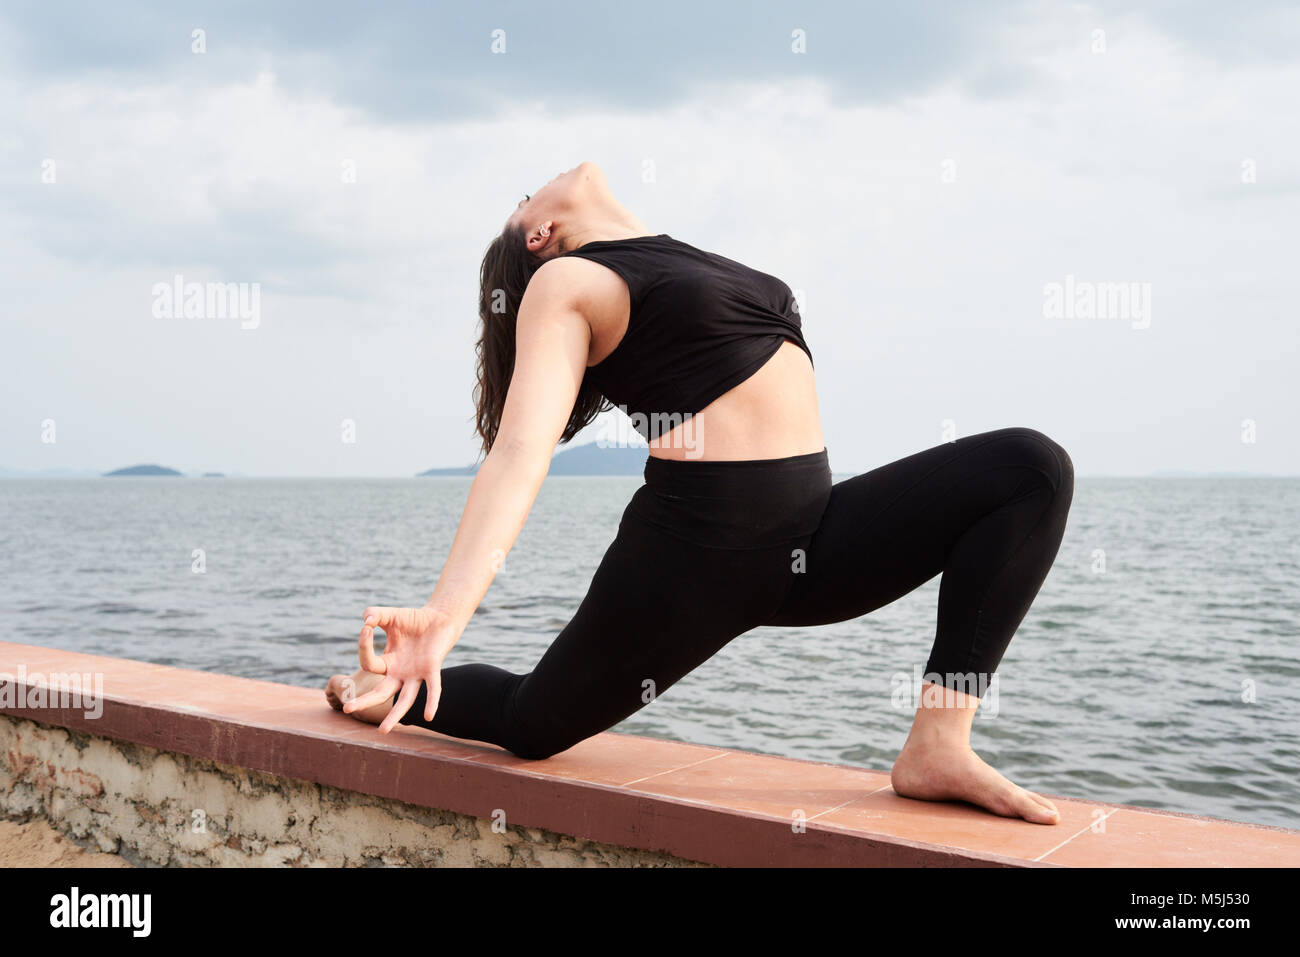 Yoga instructor in warrior position with arms opened and face up on a fence next to the sea. Kep, Cambodia. Stock Photo